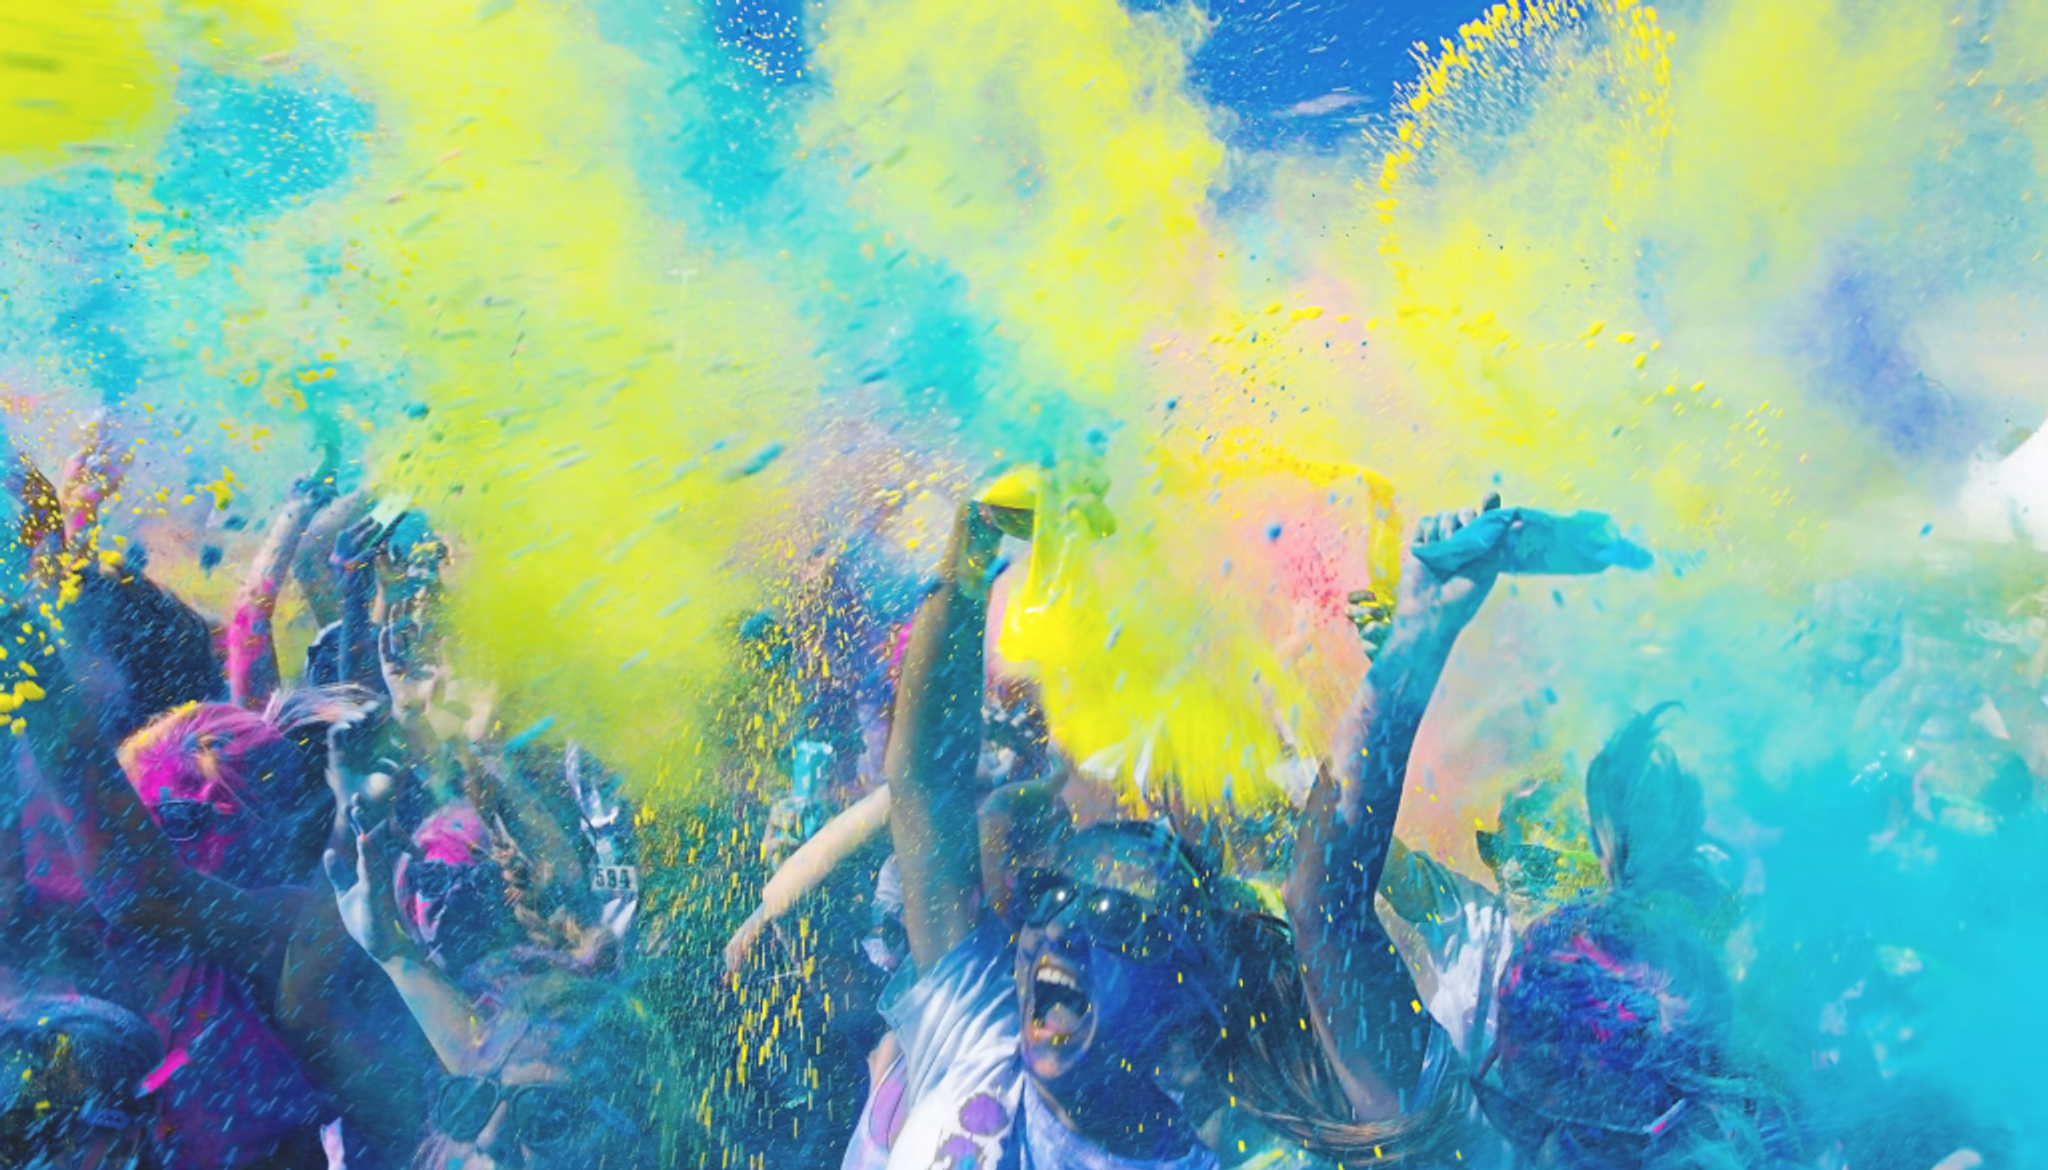 the image captures a festive event with powdered paint thrown in the air!